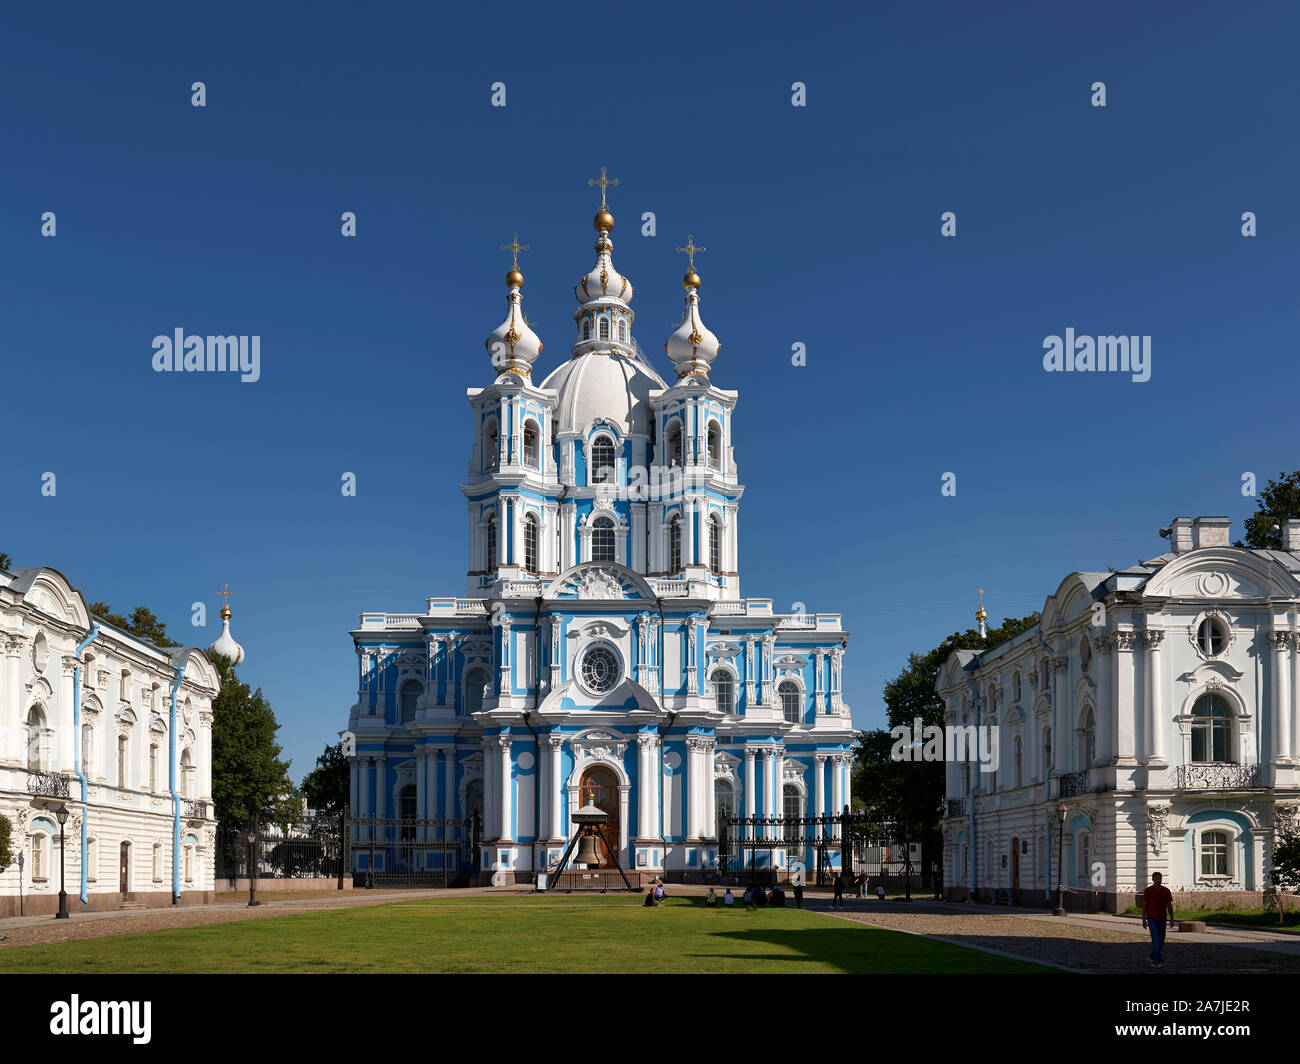 St. Petersburg Russia. Smolny Convent or Smolny Convent of the Resurrection is located on Ploschad Rastrelli, on the bank of the River Neva in Saint P Stock Photo